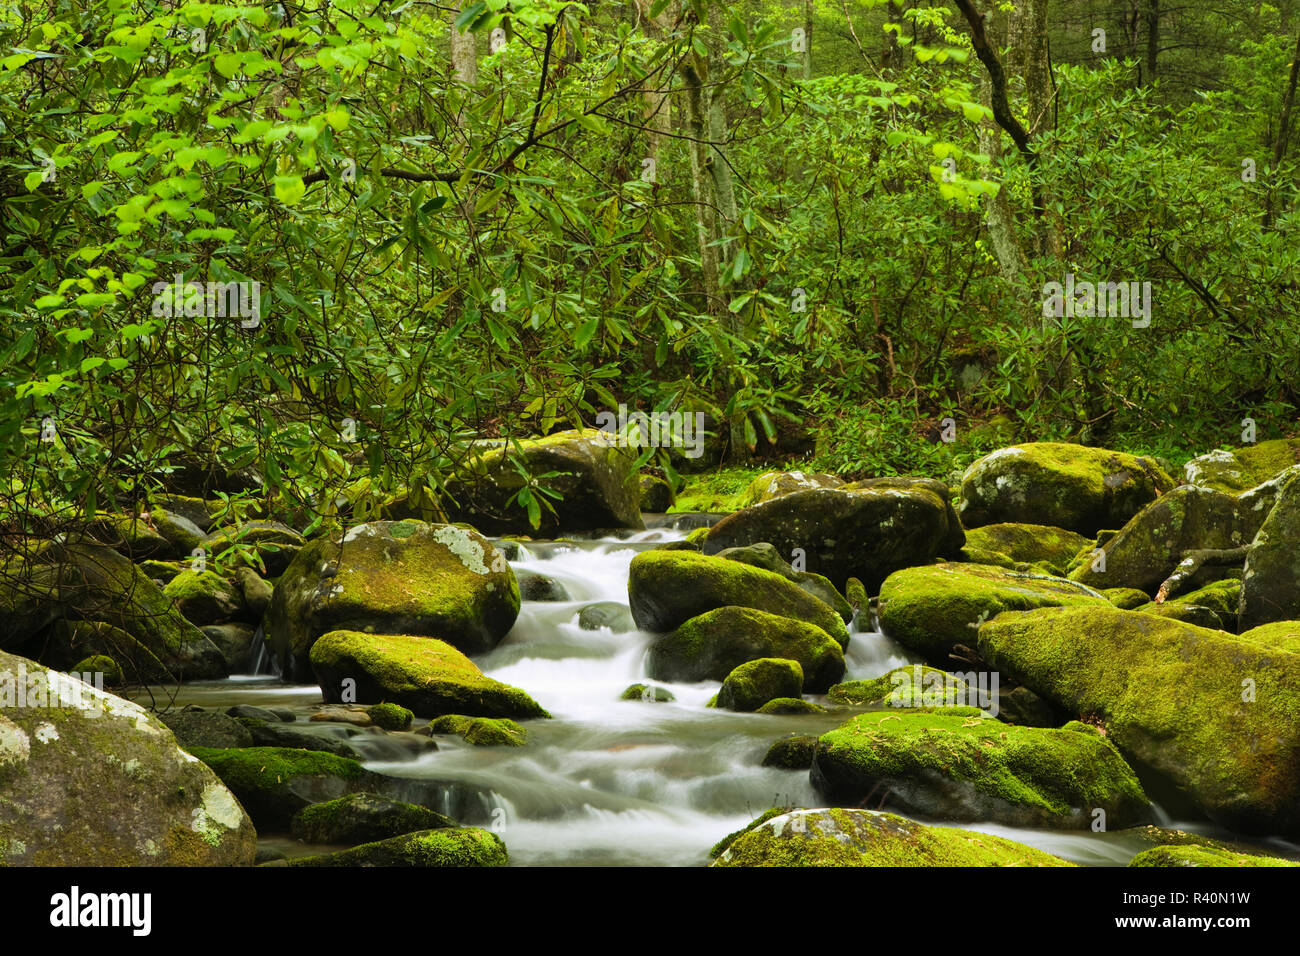 USA, Tennessee, Great Smoky Mountains National Park. Rocky creek scenic. Stock Photo